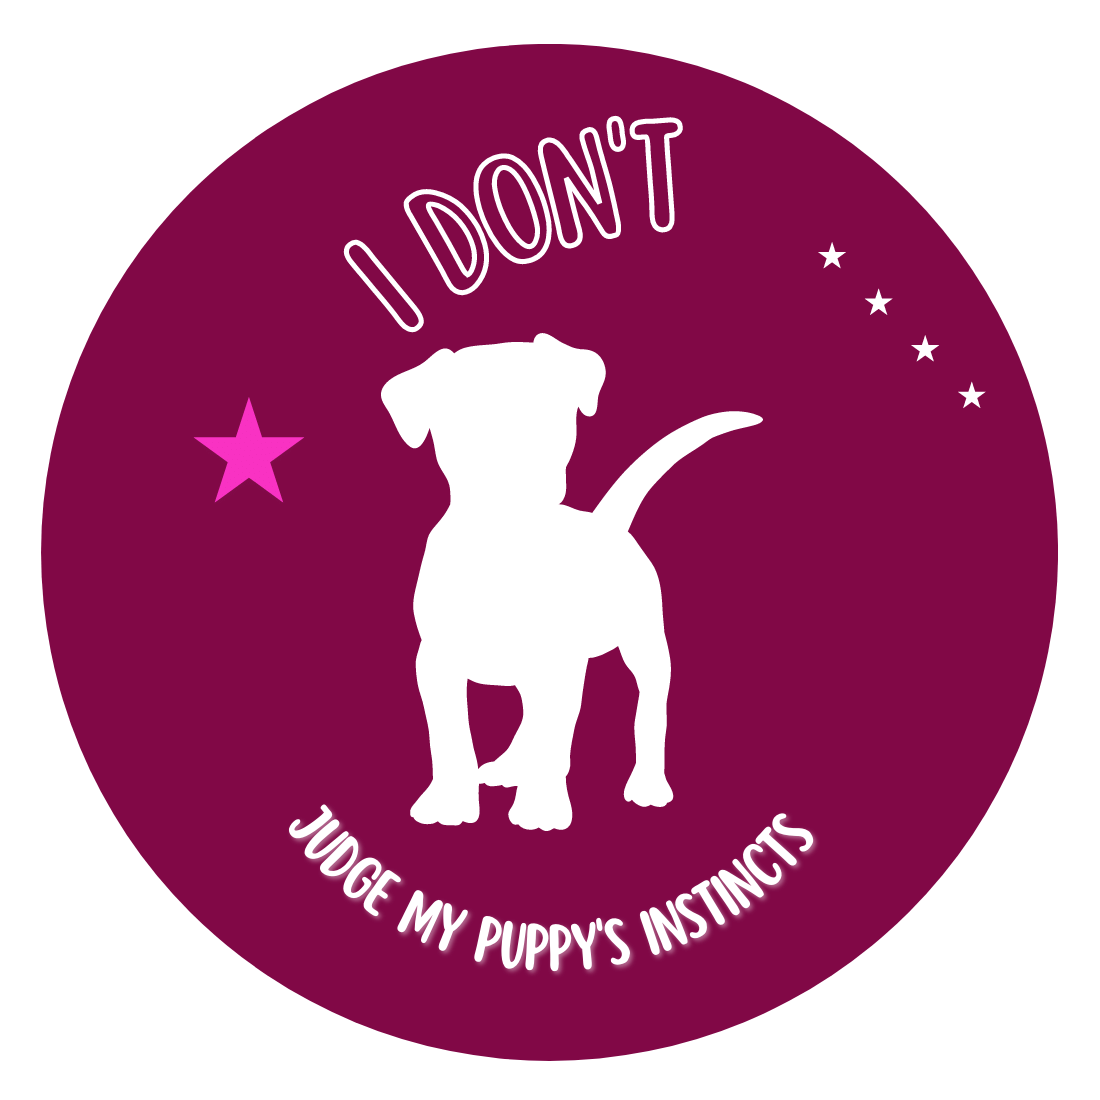 Sticker with a dog saying i don't judge my puppy's.